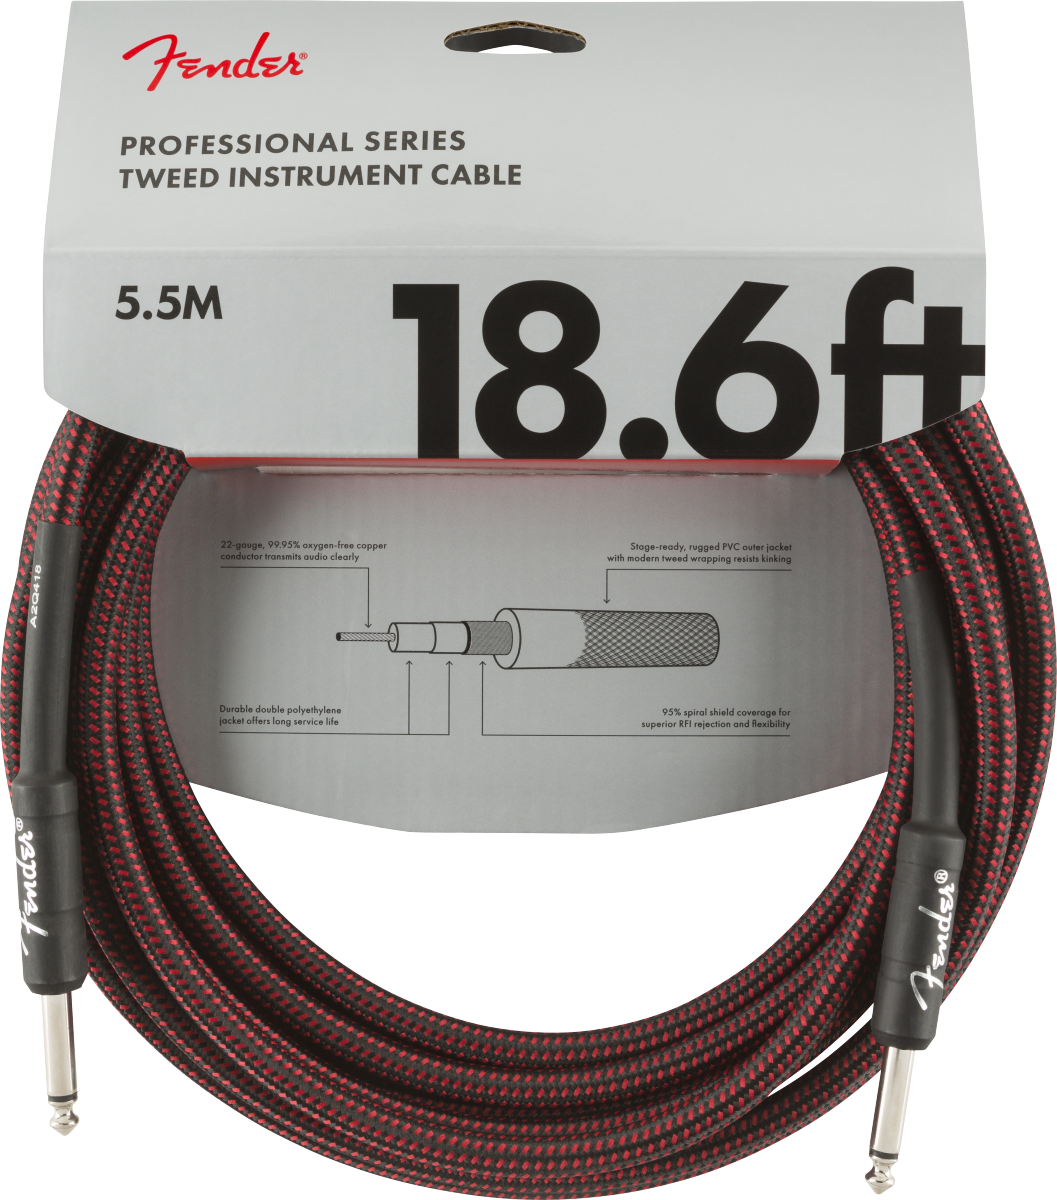 Fender Professional Series Instrument Cable, 18.6', Red Tweed